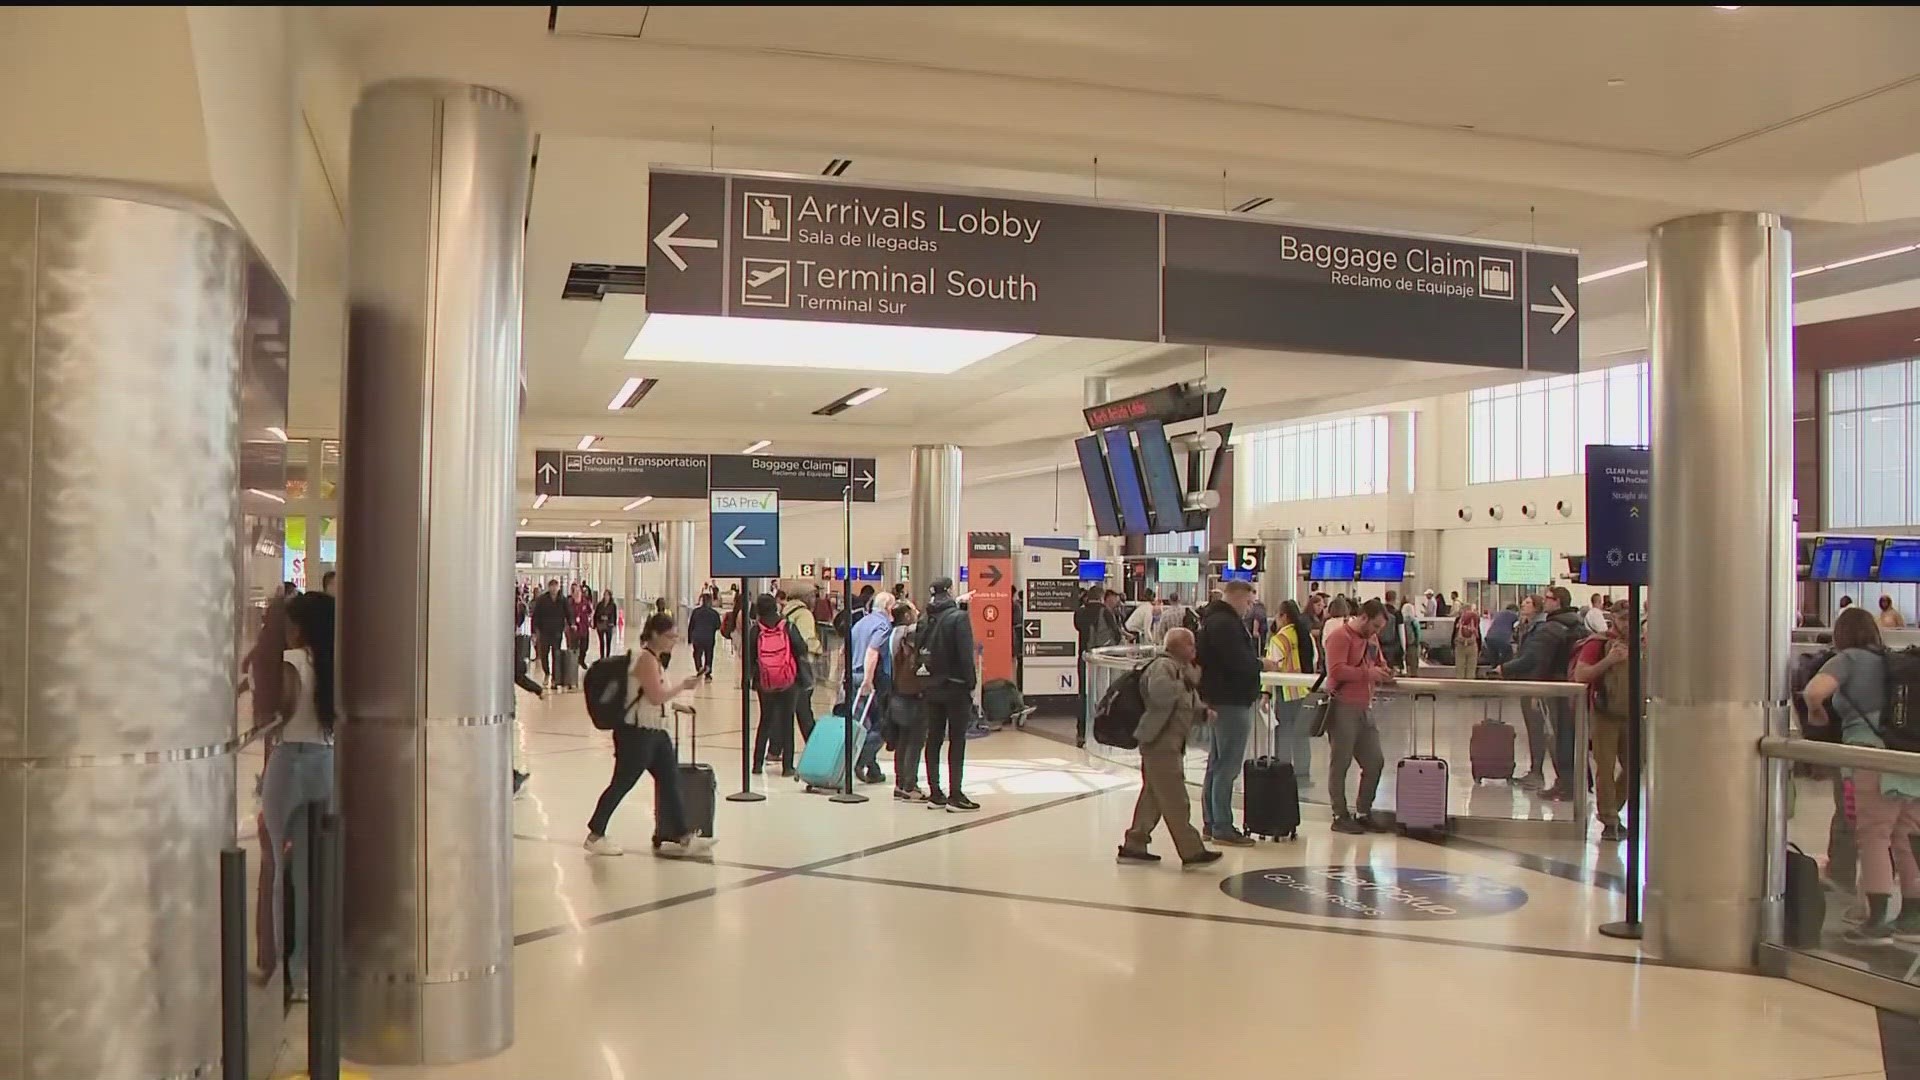 Hartsfield-Jackson Atlanta International Airport says access will be limited to "passengers, personnel, individuals meeting or greeting passengers."